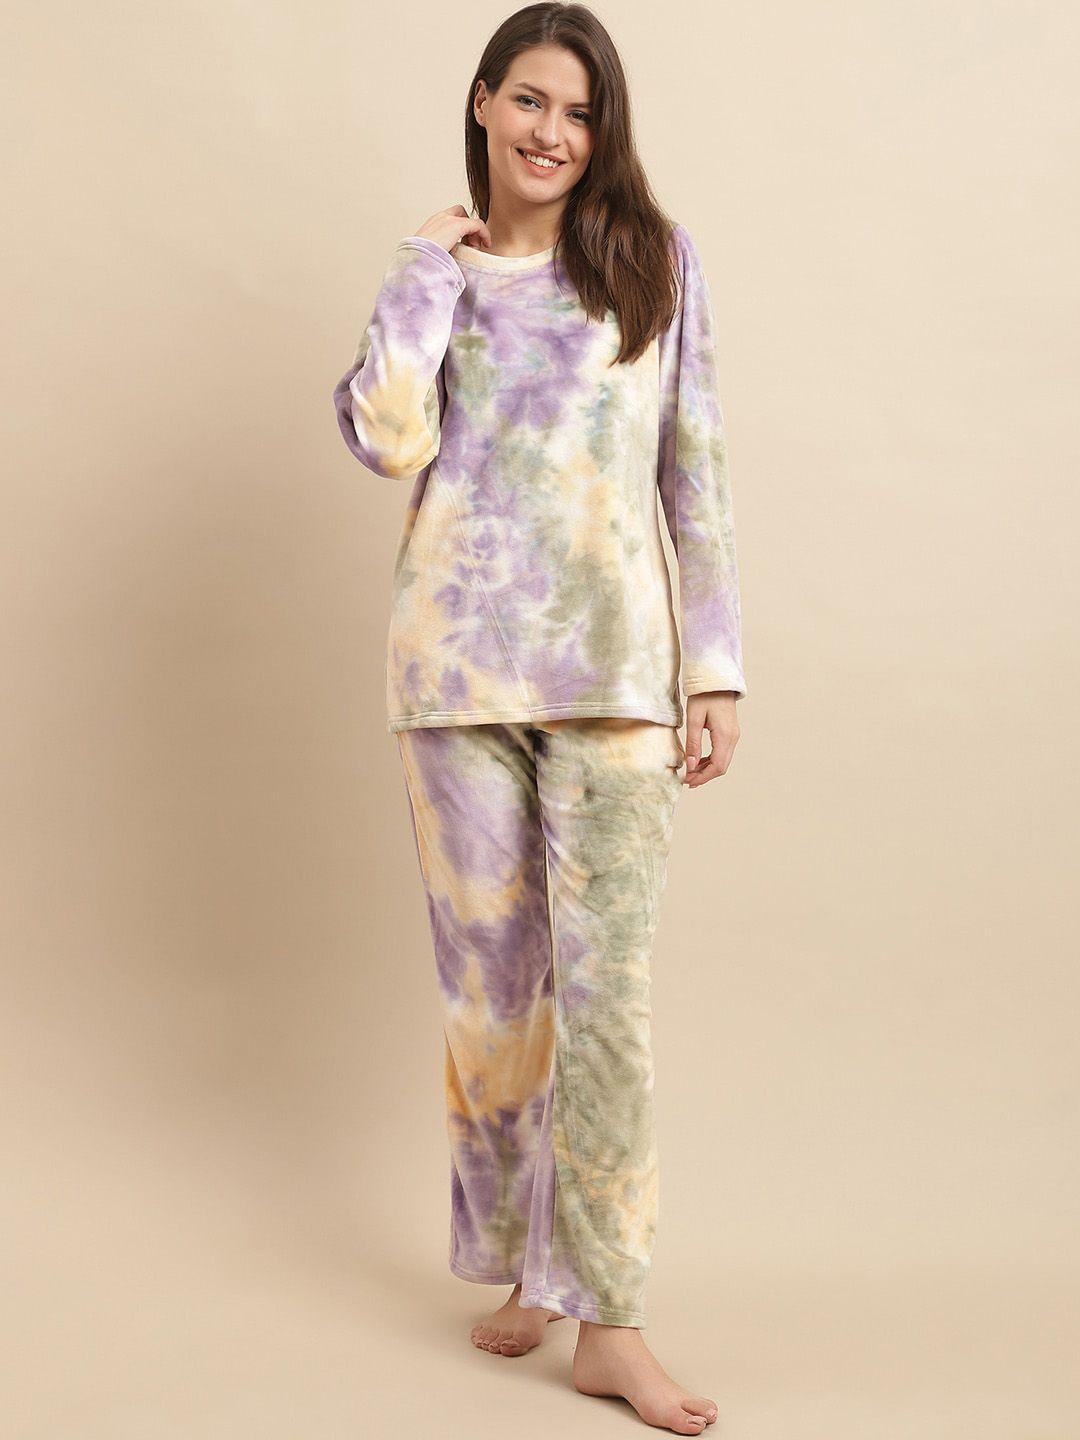 kanvin-purple-tie-and-dyed-long-sleeves-velvet-night-suit